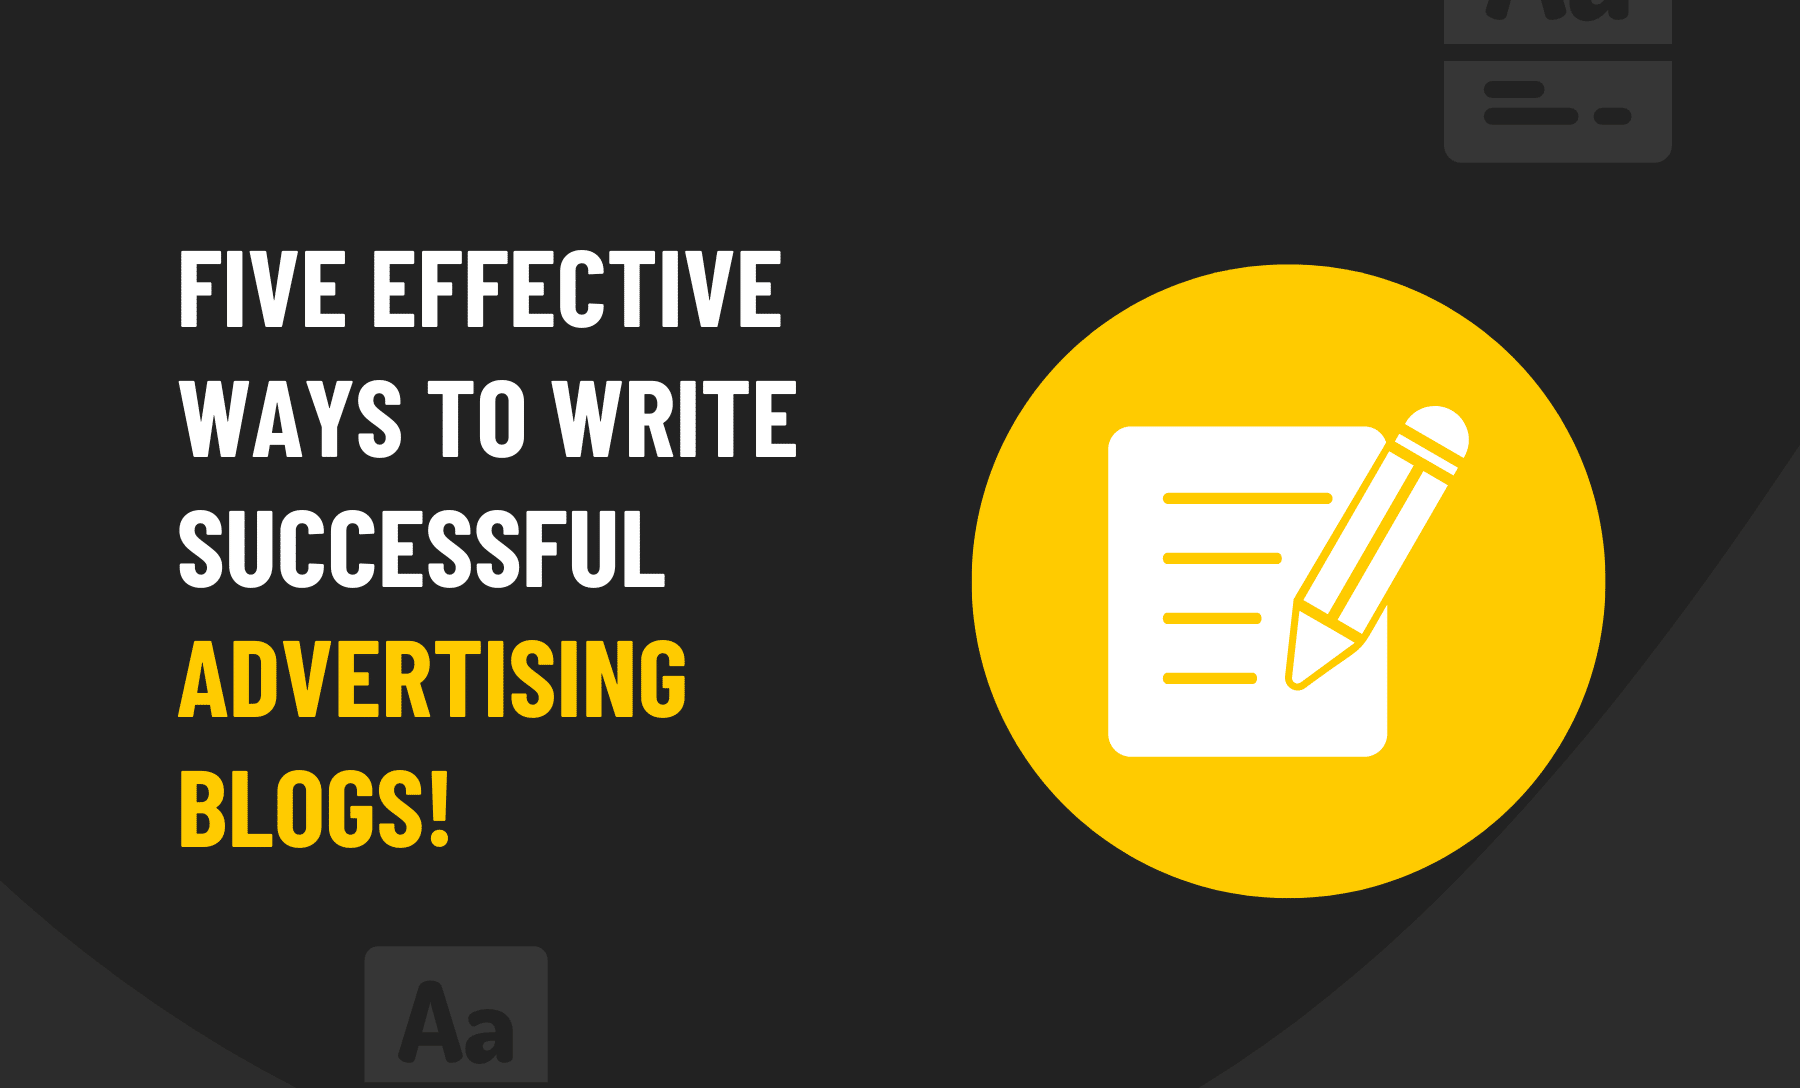 Five effective ways to write successful advertising blogs